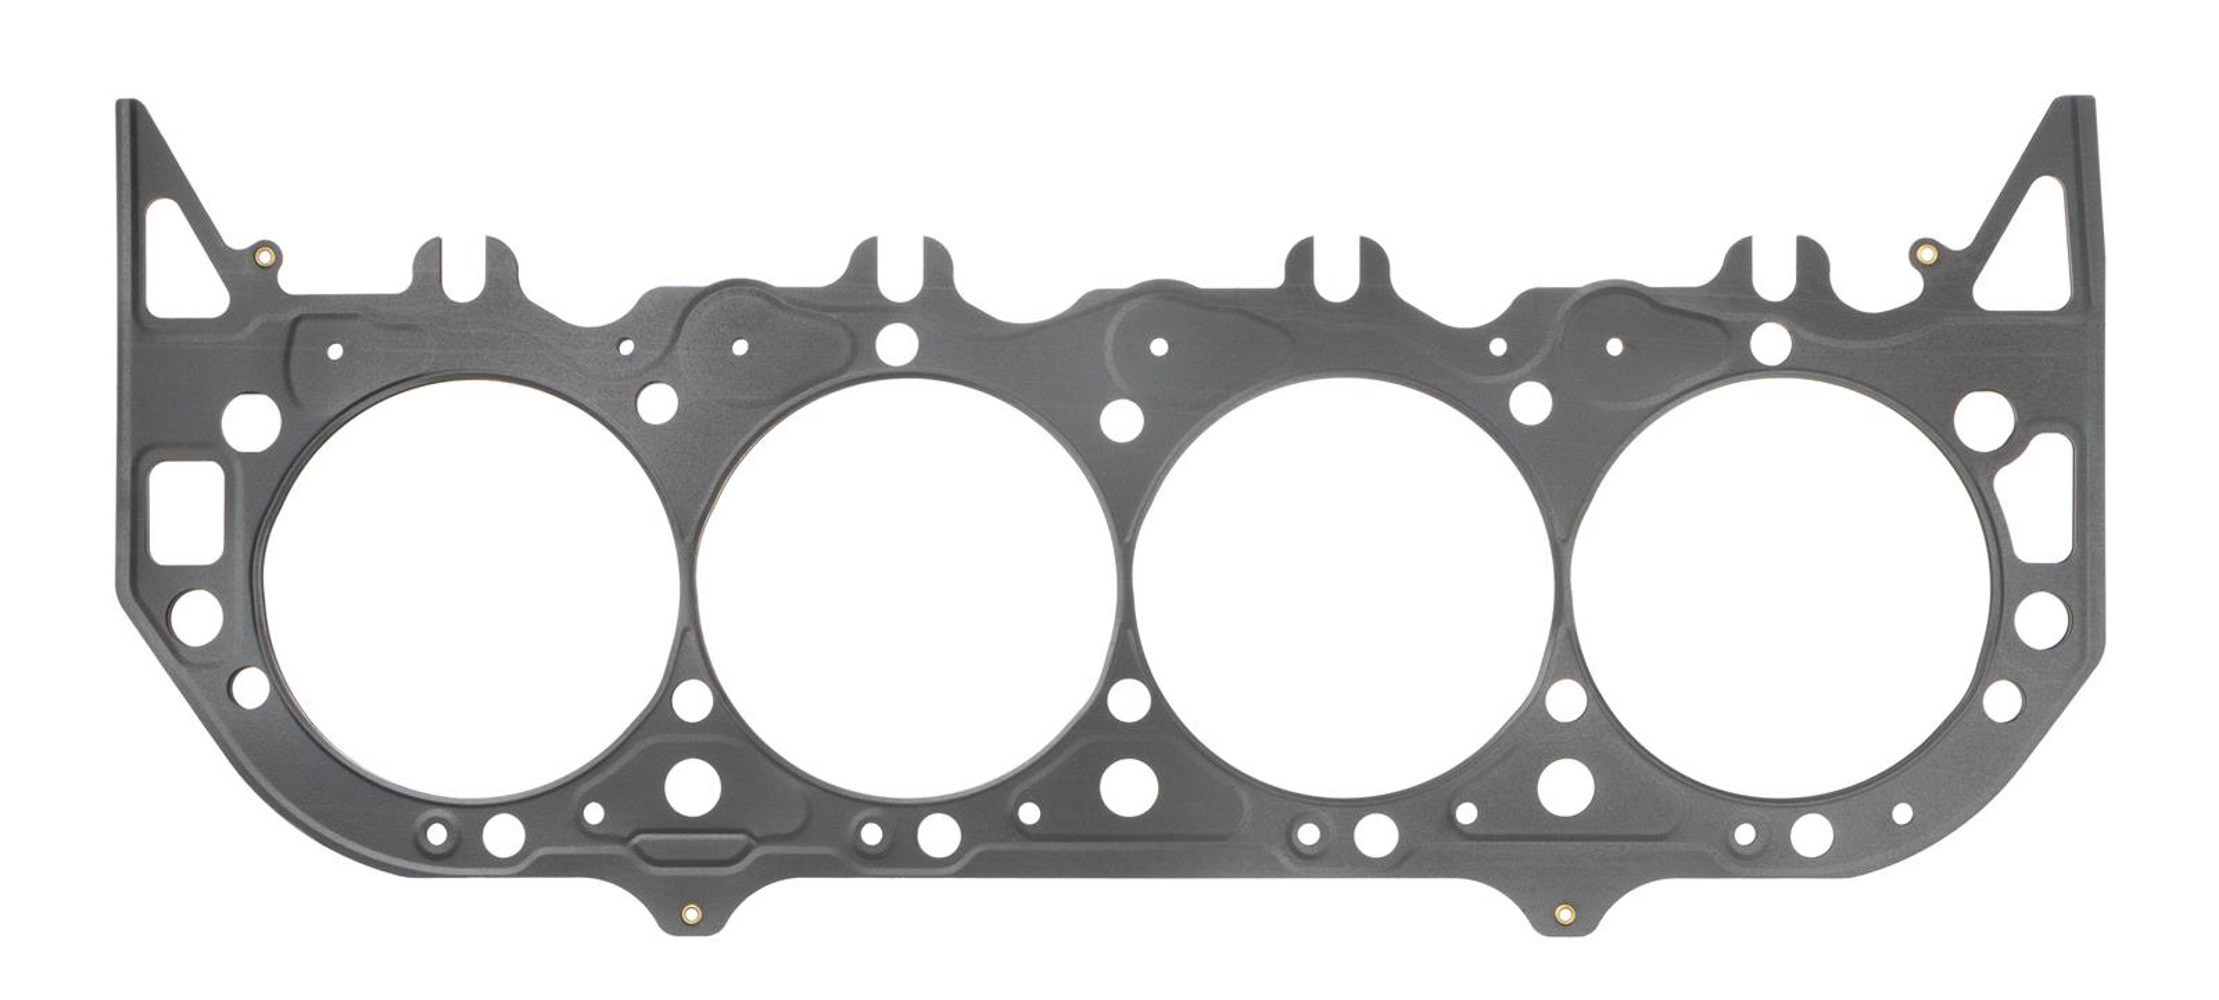 SCE Gaskets M136328 - Cylinder Head Gasket, MLS Spartan, 4.630 in Bore, 0.027 in Compression Thickness, Multi-Layer Steel, Big Block Chevy, Each